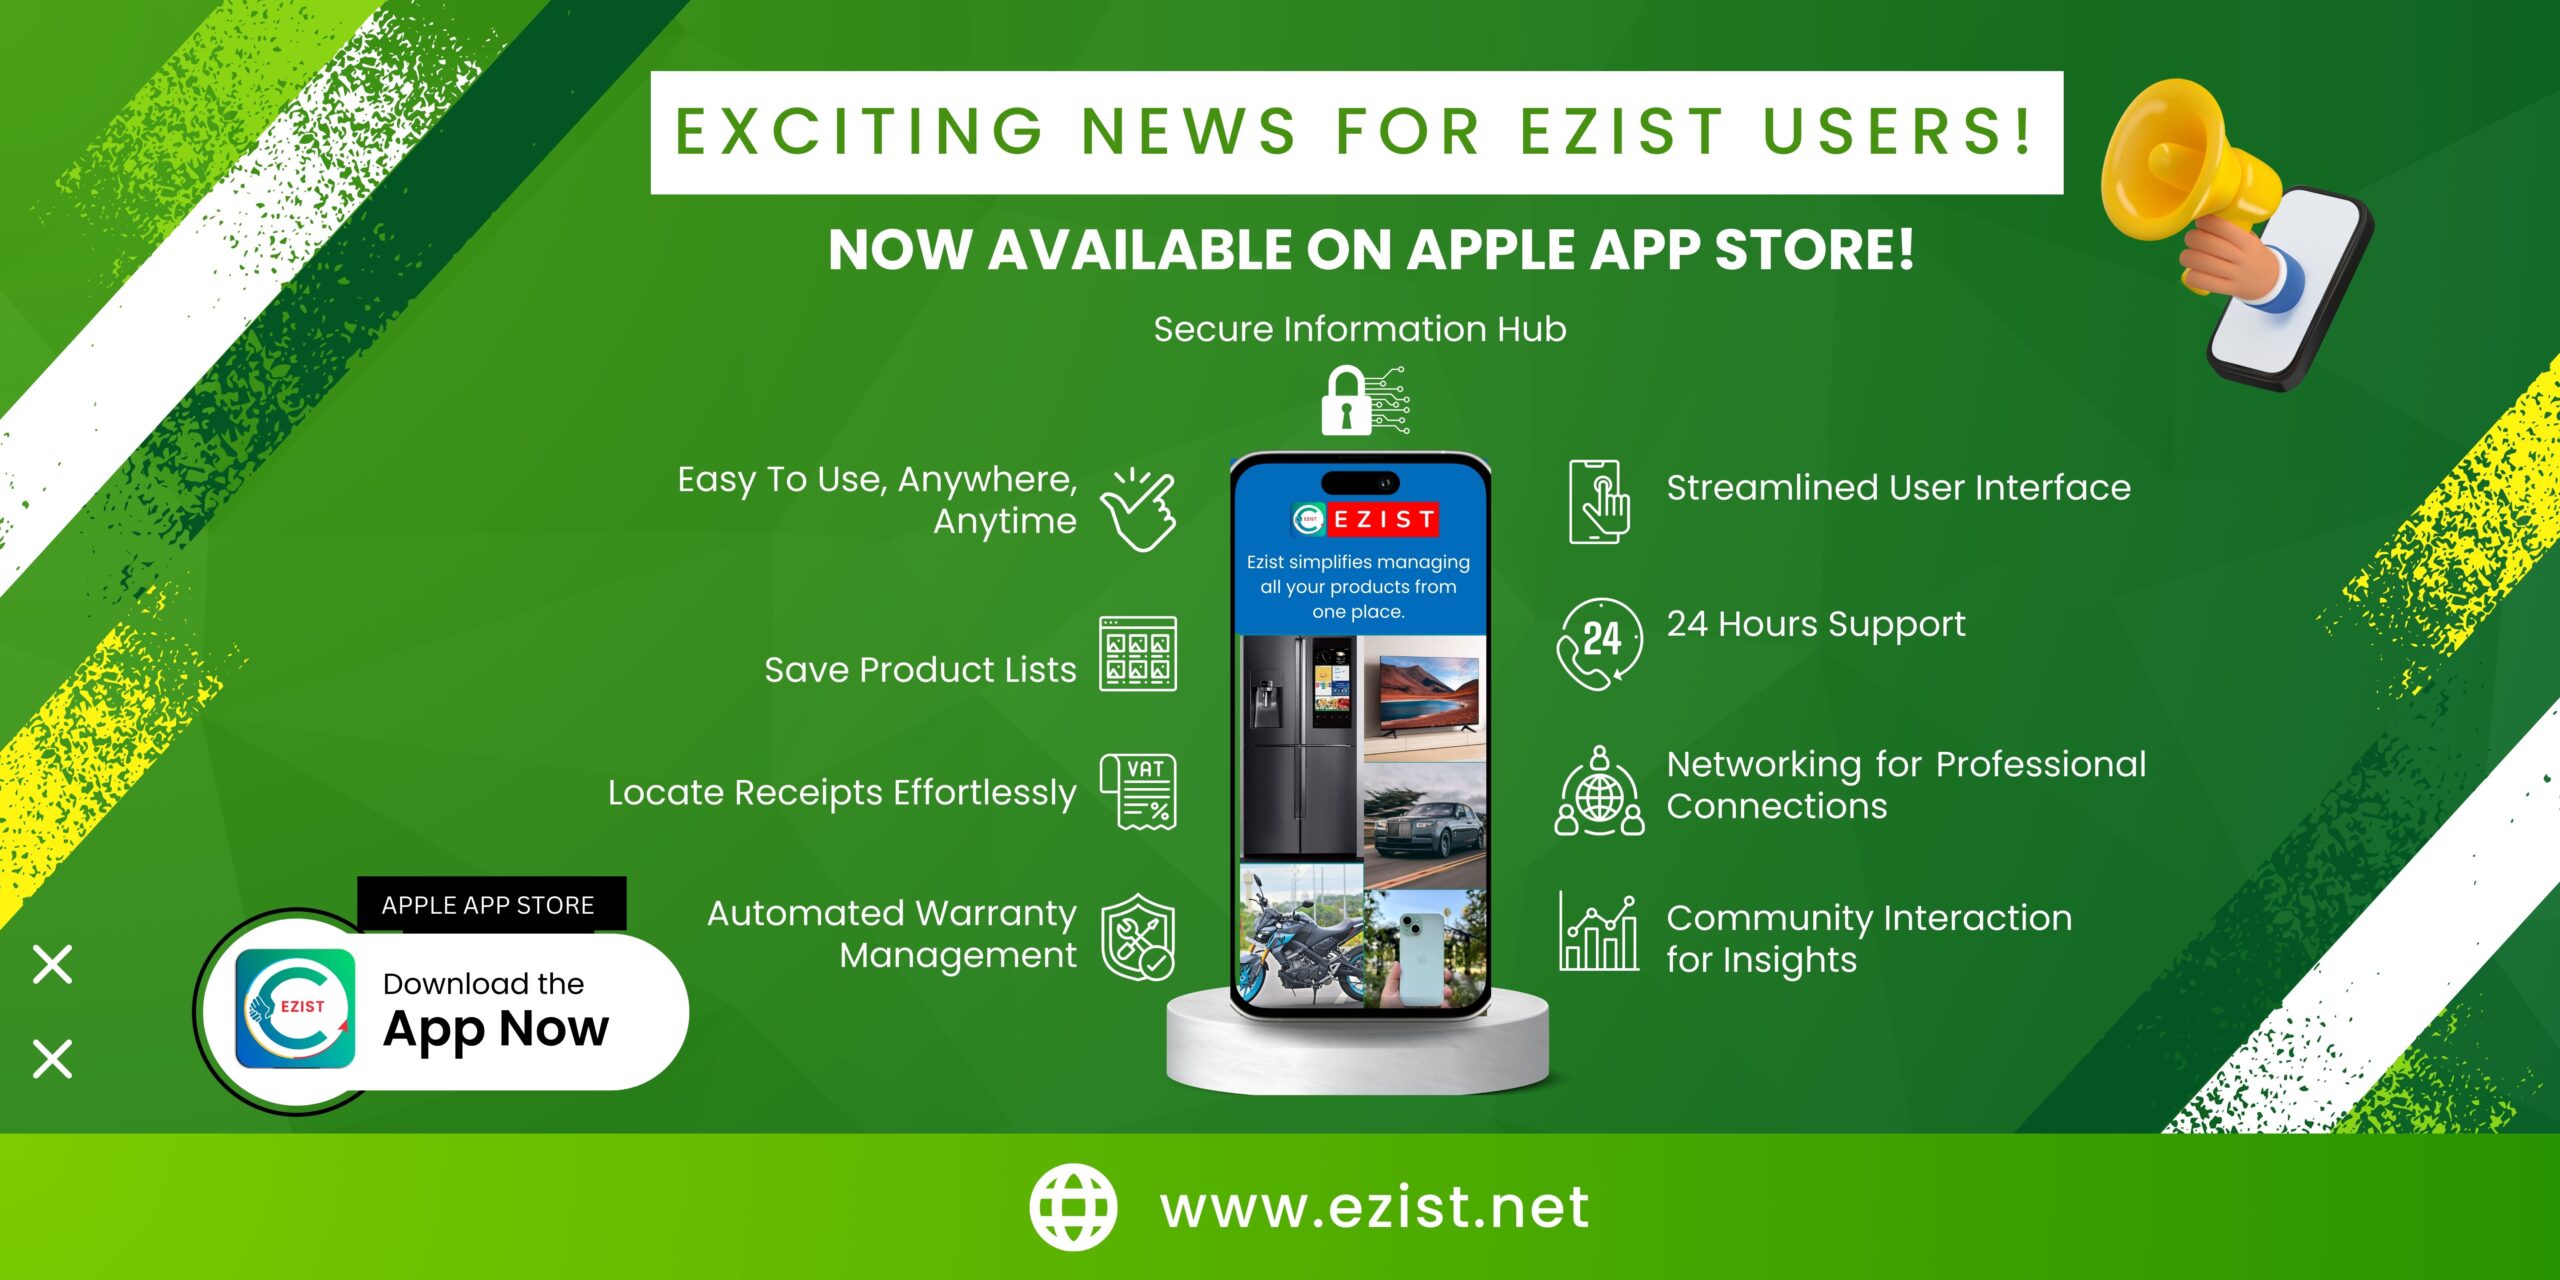 Danbury, USA, 16 March 2024 – Ezist, the Multi-brand products management software, is thrilled to announce that its highly anticipated iOS app is now available for download on the Apple App Store. With this new release Version 1.1 users can seamlessly manage their vehicles, gadgets, home appliances etc… from their iPhone or iPad, making Multi Brand products management from one mobile app more convenient than ever before. Ezist has long been recognized as a game-changer in multi-brand product management. It offers users a centralized platform to store information, track maintenance schedules, and connect with service providers and manufacturers. Now, with the launch of the iOS app, users have even more flexibility and convenience in managing their own products on the go. Key features of the Ezist iOS app include: Effortless Information Management: Store all appliance details in one convenient location, from user manuals to warranty information. Streamlined Maintenance Reminders: Receive timely reminders for maintenance tasks, ensuring appliances are always in top condition. Proactive Appliance Care: Get notifications about software updates, recalls, and security patches directly within the app. Easy Service Connection: Connect with local service providers directly through the app, saving time and hassle. Community Support: Engage with other users, share insights, and troubleshoot problems together. “We’re excited to bring the Ezist experience to Apple users,” said Sha, Founder of Ezist. “Our goal has always been to simplify products management for our users, and the iOS app allows us to do just that. Whether at home or on the go, users can now access all the features they love and easily manage their appliances, vehicles, and gadgets.” The Ezist iOS app is now available for download on the App Store. To learn more about Ezist and download the app, visit the Apple App Store Link: https://bit.ly/3VbzV47. About Ezist: Ezist is a leading product management software designed to simplify appliance, vehicle, and gadget management for users worldwide. With a comprehensive suite of features and a user-friendly interface, Ezist empowers users to take control of their appliances, vehicles, and gadgets and enjoy a stress-free ownership experience.